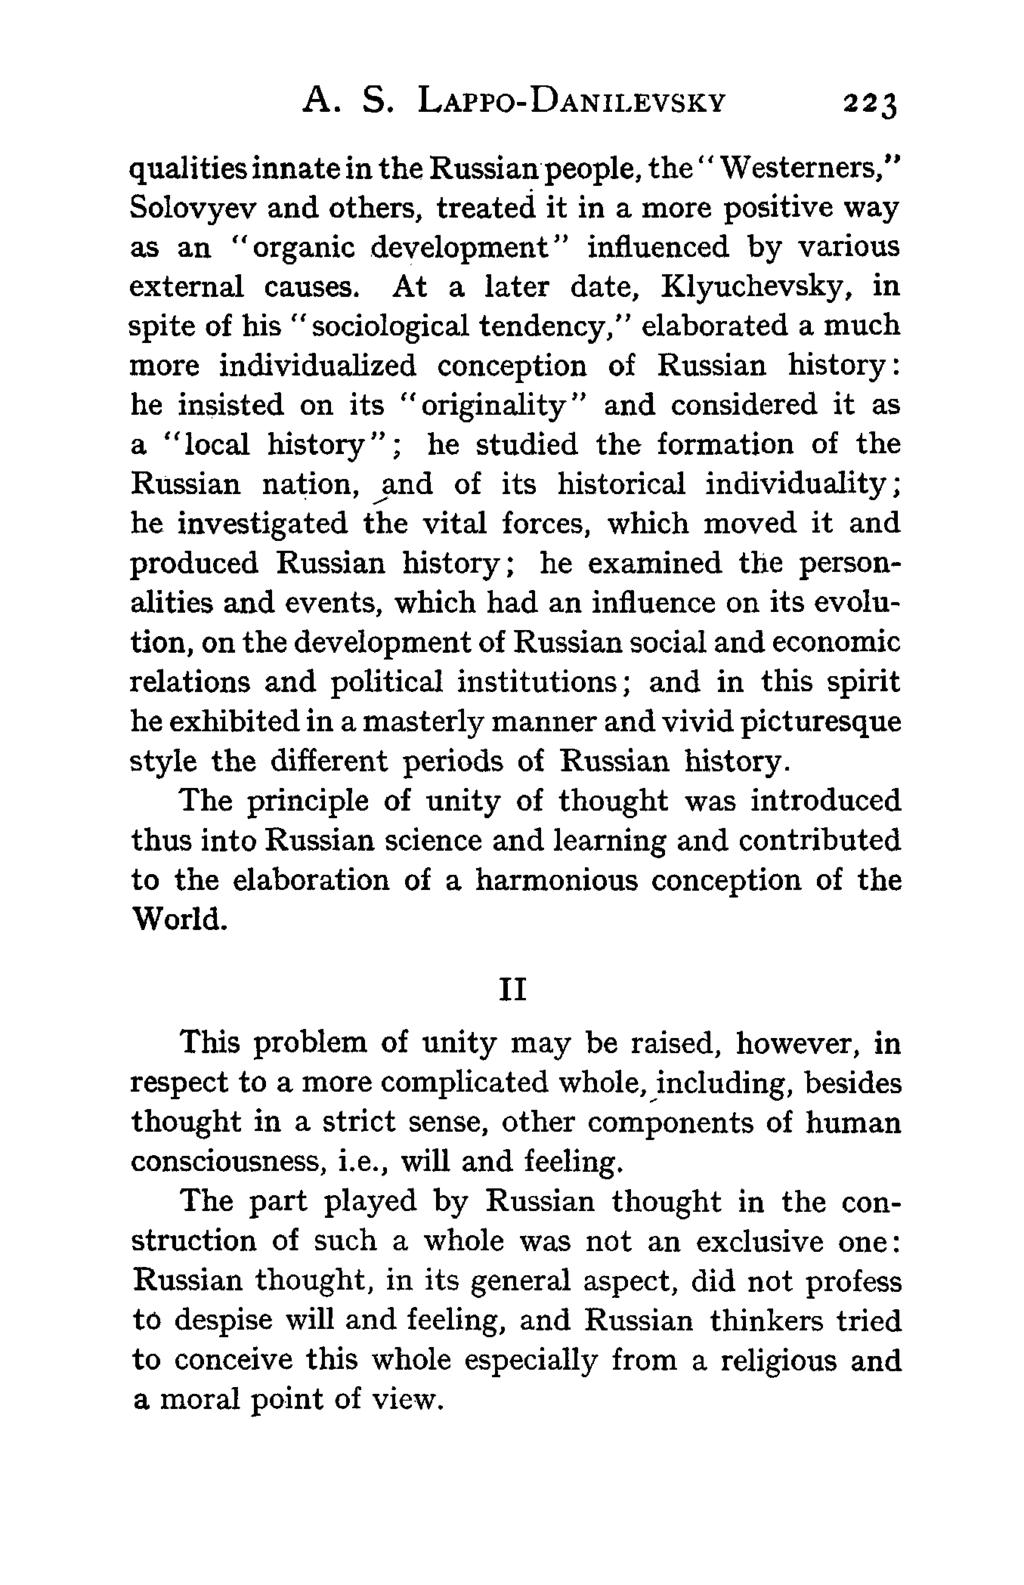 A. S. LAPPO-DANILEVSKY 223 qualities innate in the Russian people, the " Westerners," Solovyev and others, treated it in a more positive way as an "organic development" influenced by various external